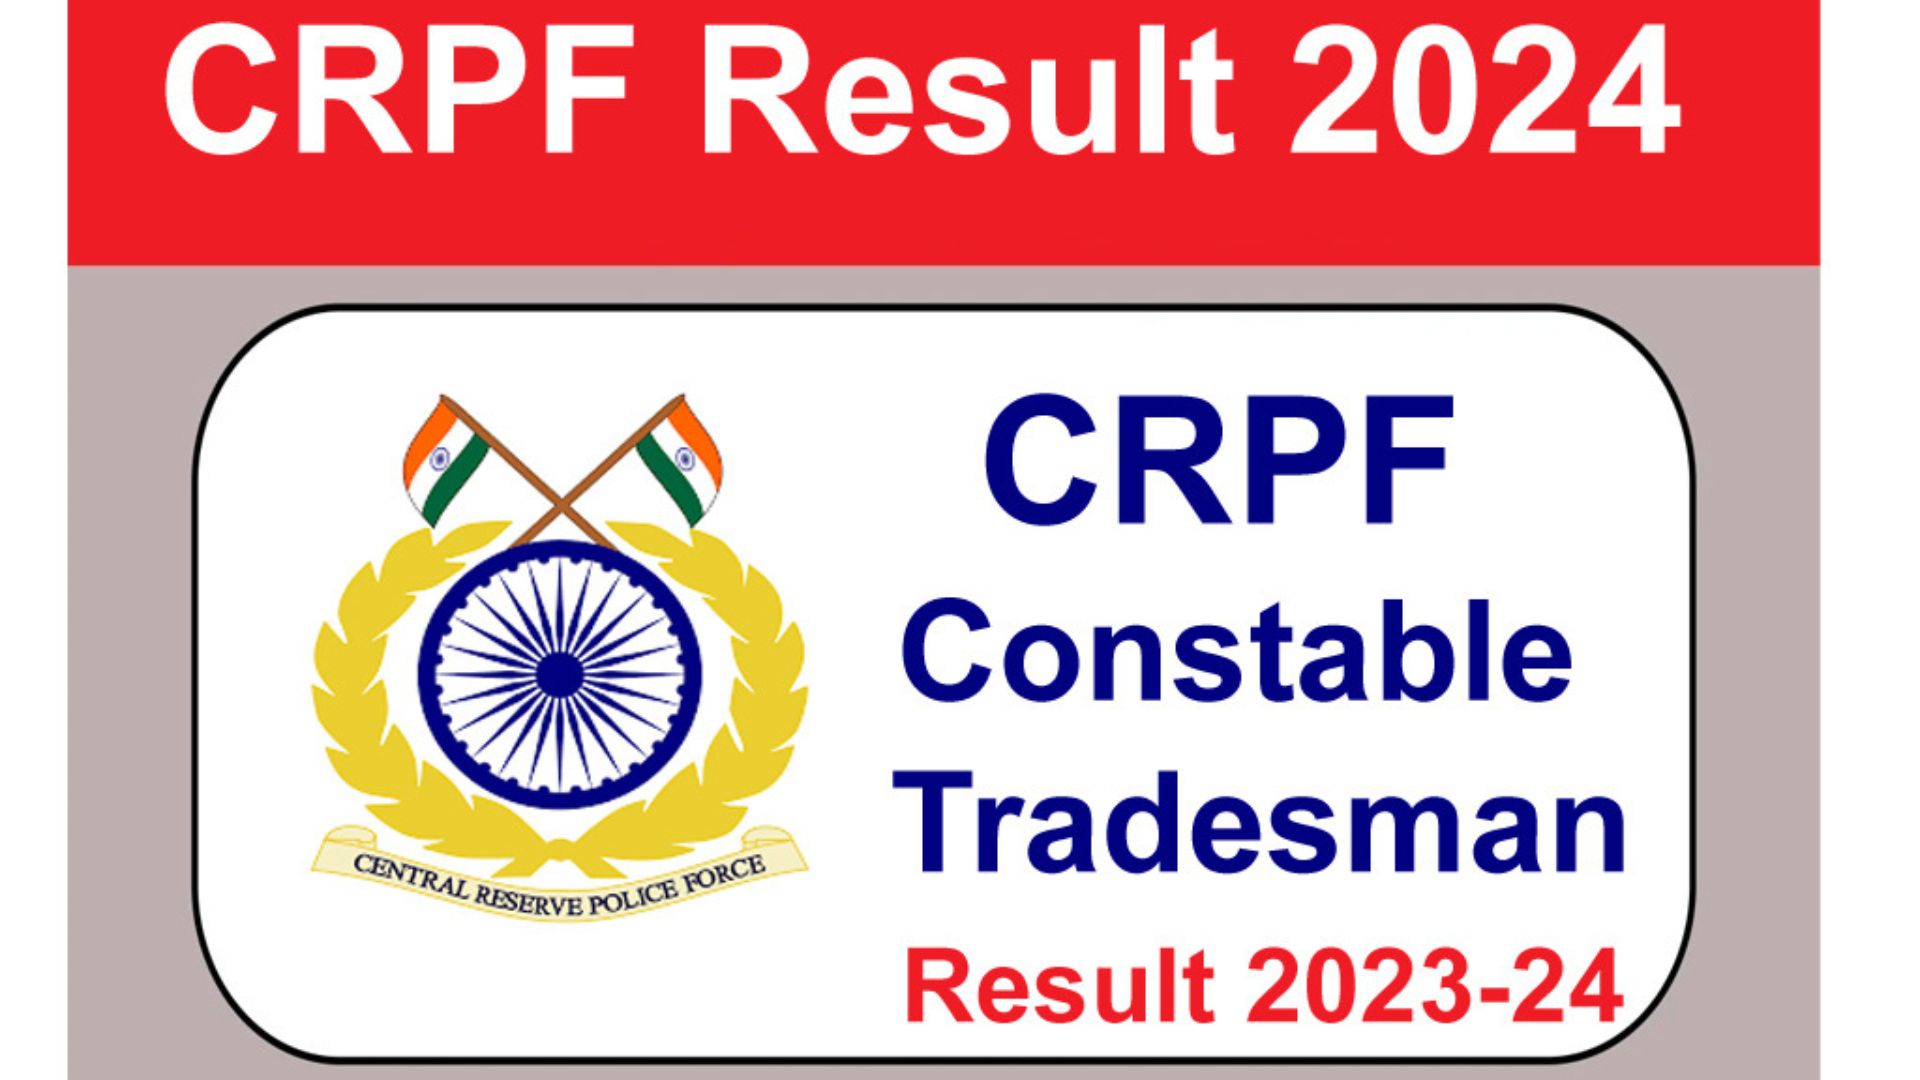 CRPF Constable Tradesman Result 2024 Declared | Click Here For The Direct Link